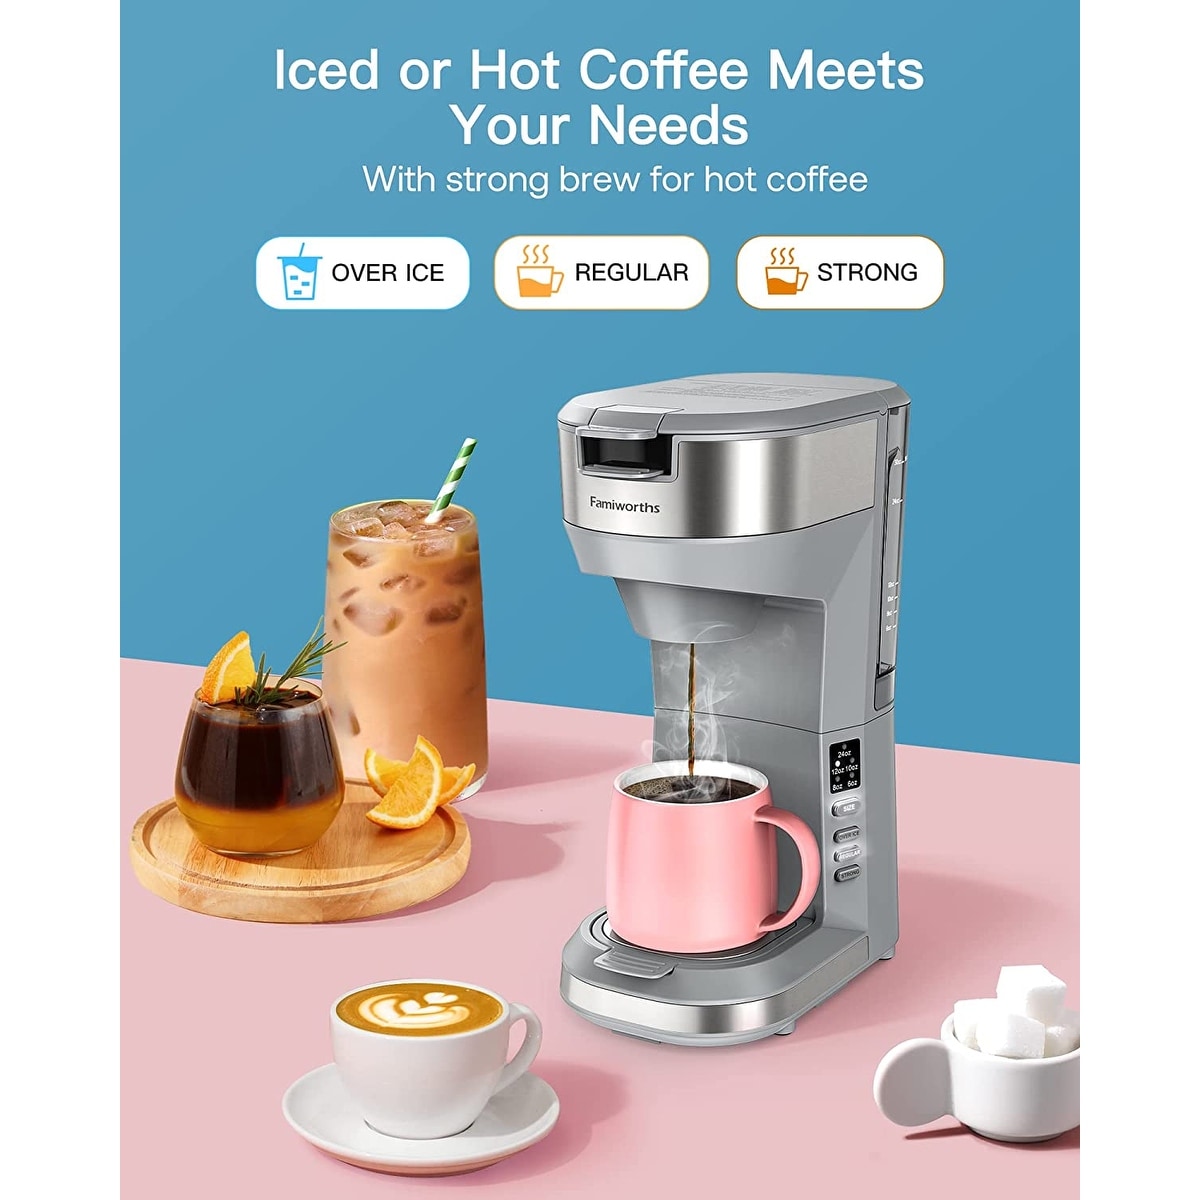 https://ak1.ostkcdn.com/images/products/is/images/direct/116cdc07188eea45ed6604454a4663eda2303bff/Hot-and-Iced-Coffee-Maker-for-K-Cups-and-Ground-Coffee%2C-4-5-Cups-Coffee-Maker-and-Single-serve-Brewers.jpg